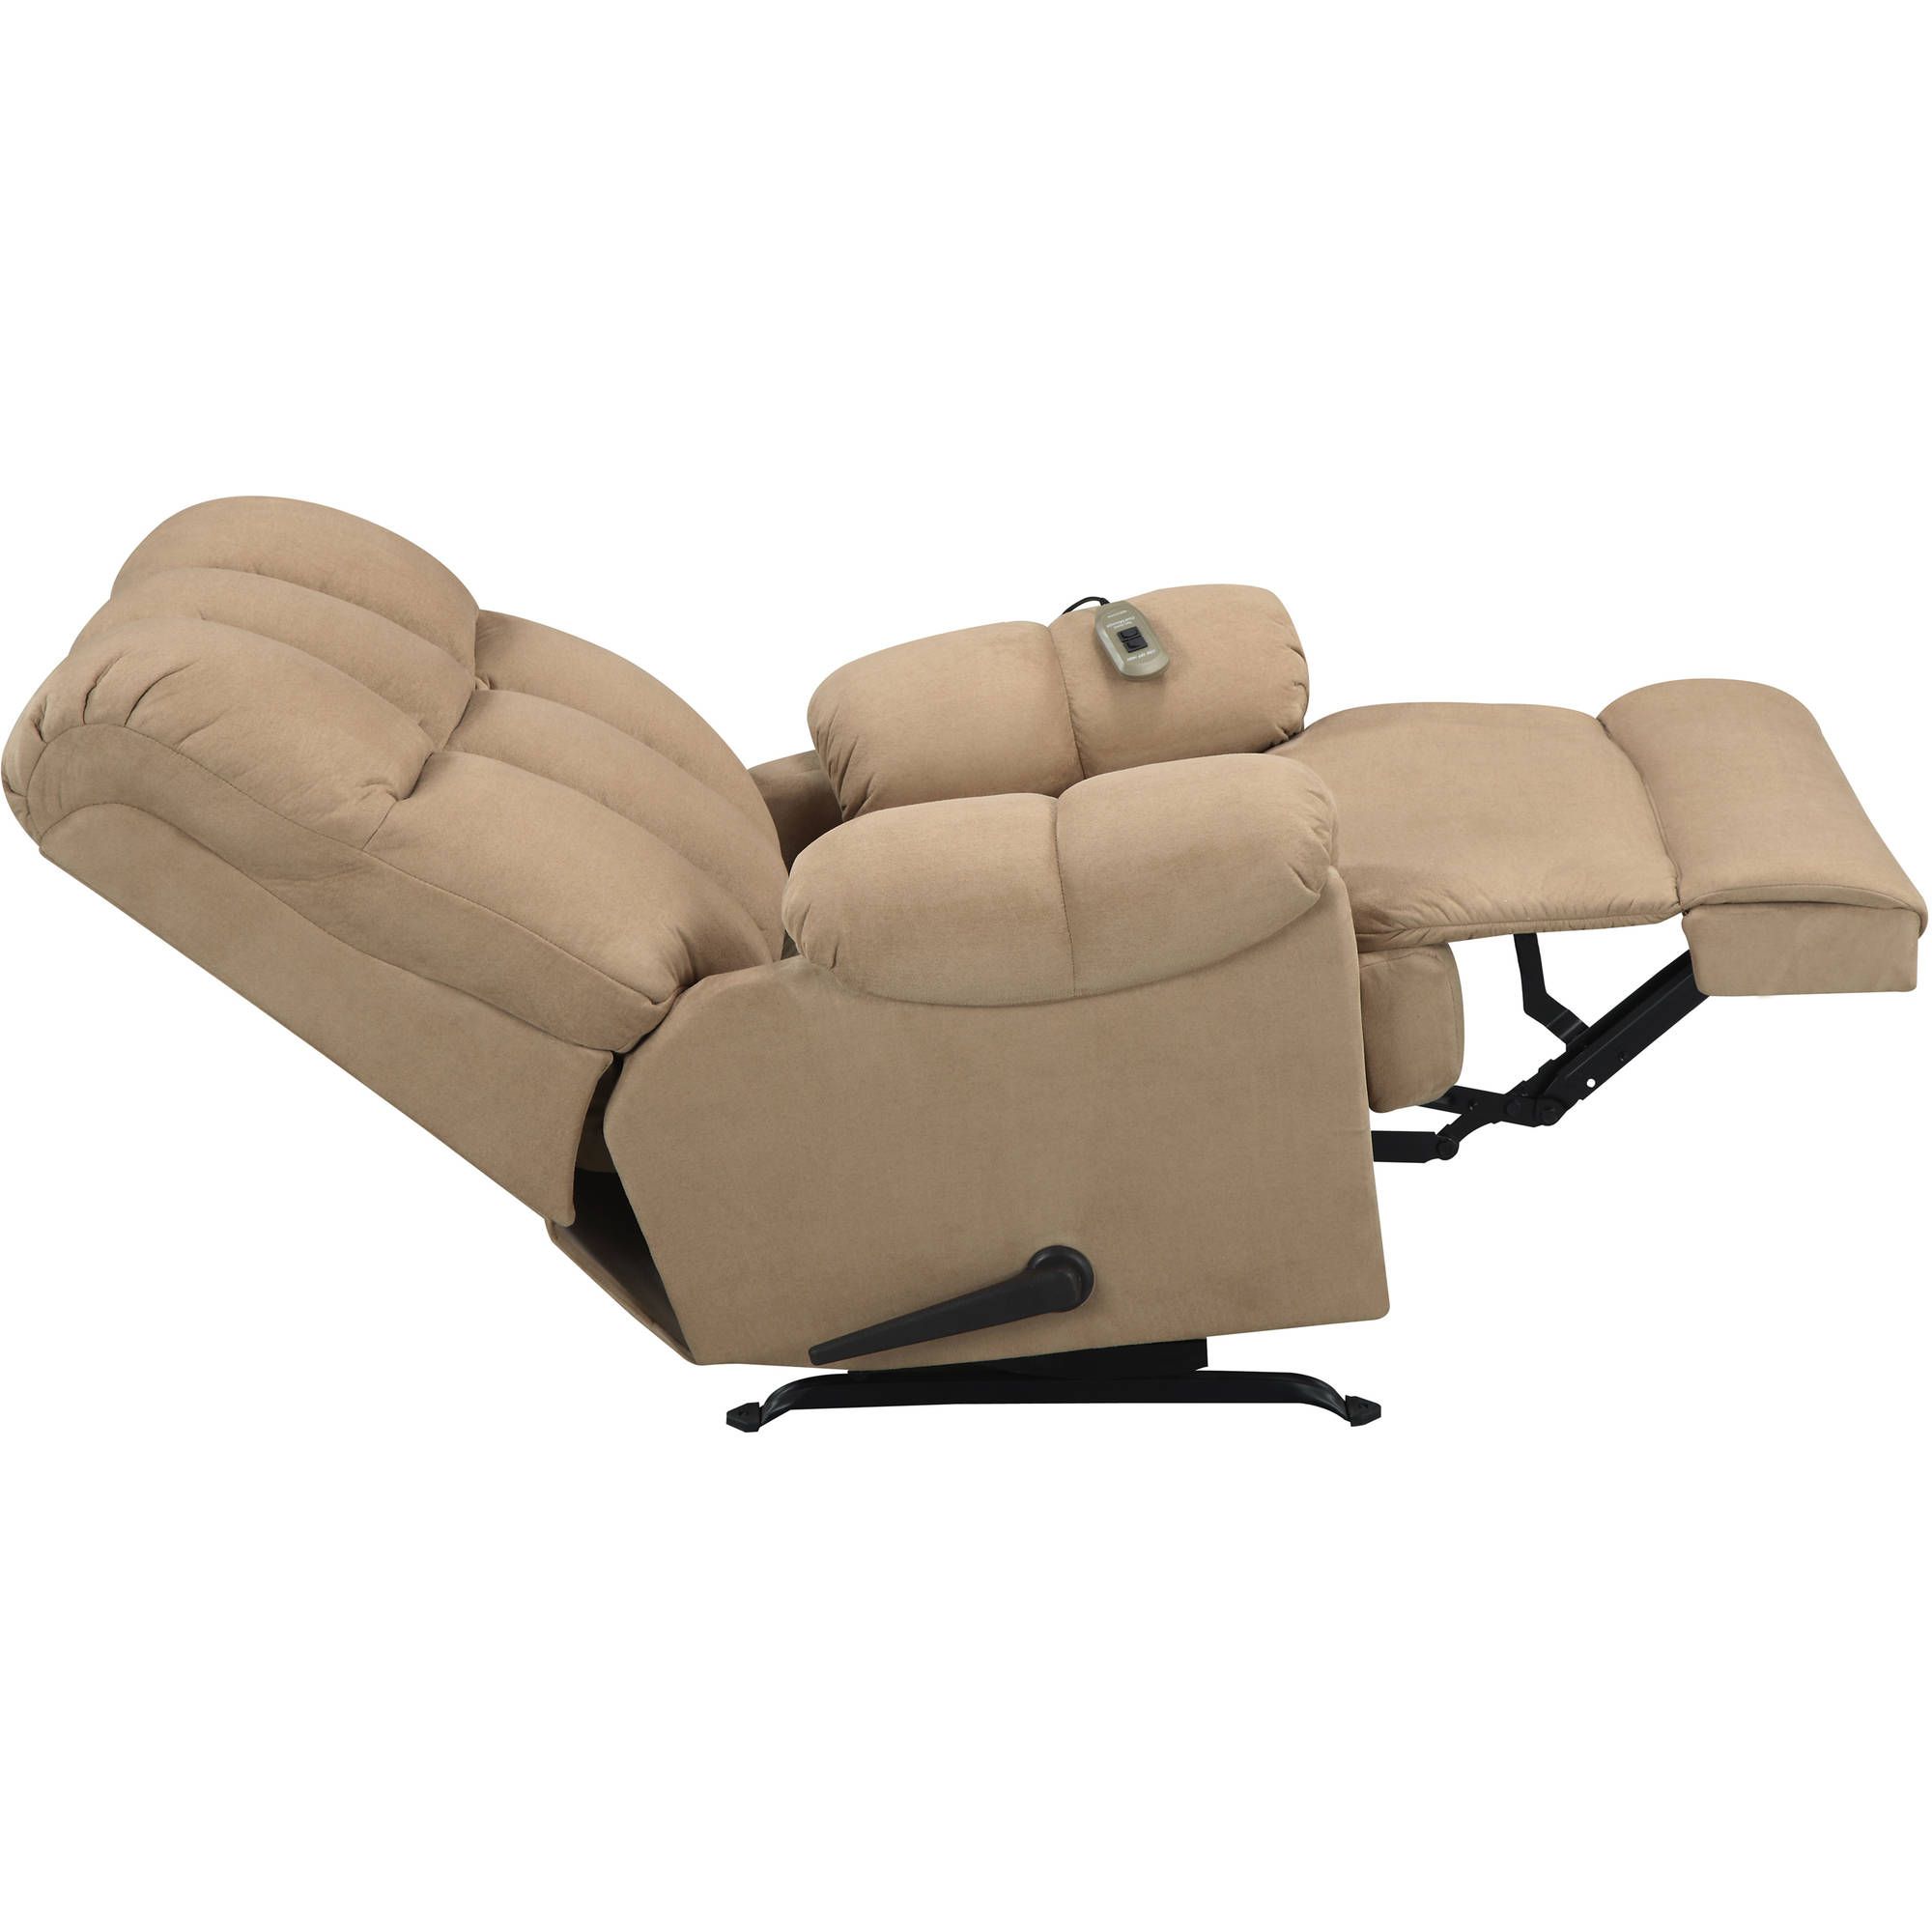 NEW Massage Rocking Recliner Chair Comfortable Padded Sofa Lounge Reclining Home Rocker Upholstered Relaxation Seat Massager *↓READ↓*